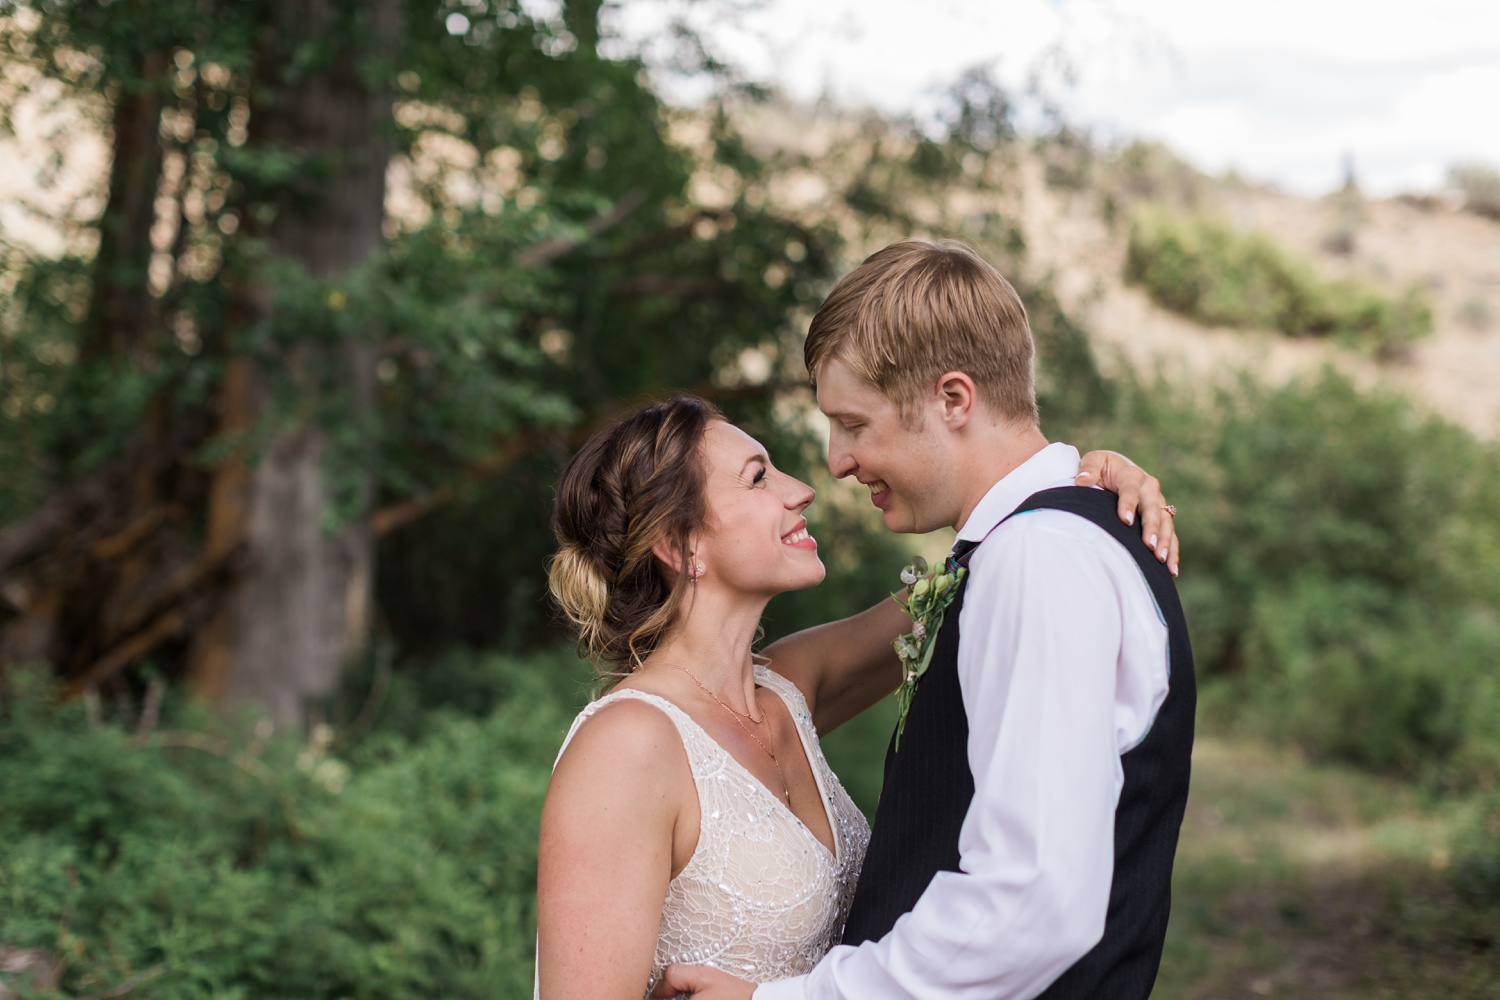 A bride and groom gaze lovingly at each other before their wedding in Winthrop, Eastern Washington. | Joanna Monger Photography | Seattle & Snohomish Wedding Photographer